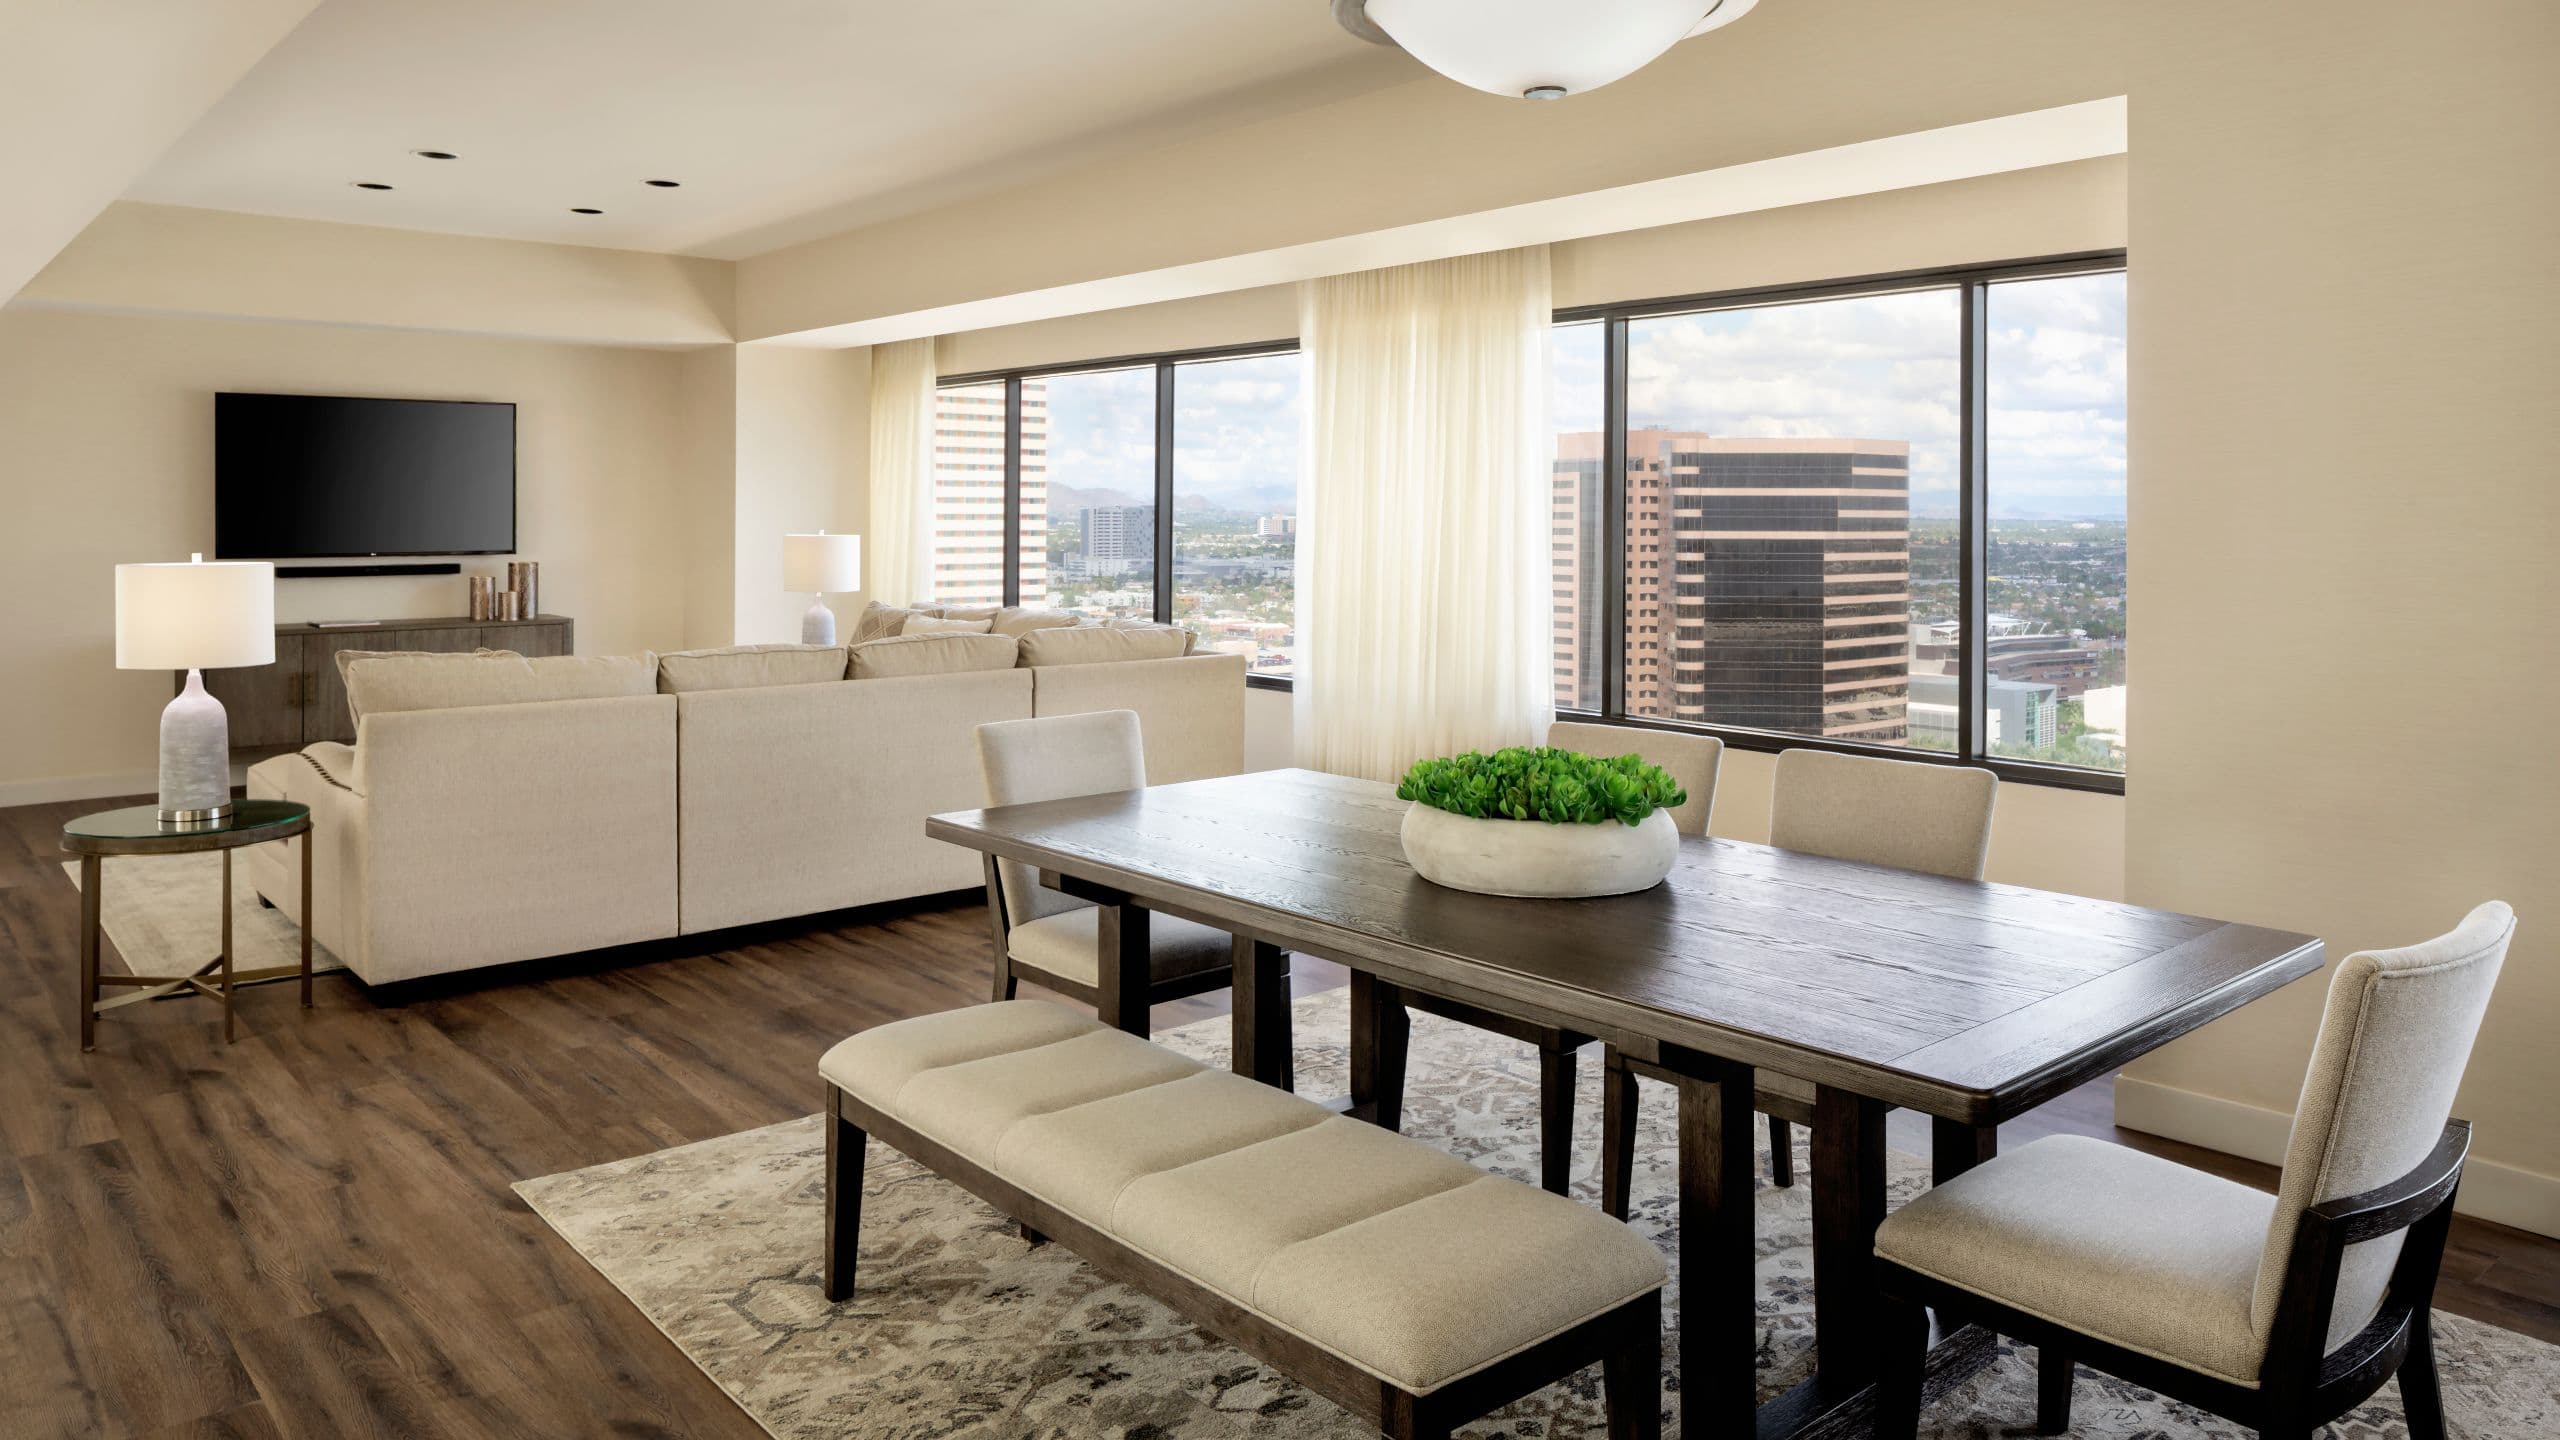 A living room and dining area from a one bedroom hotel suite overlooking downtown Phoenix